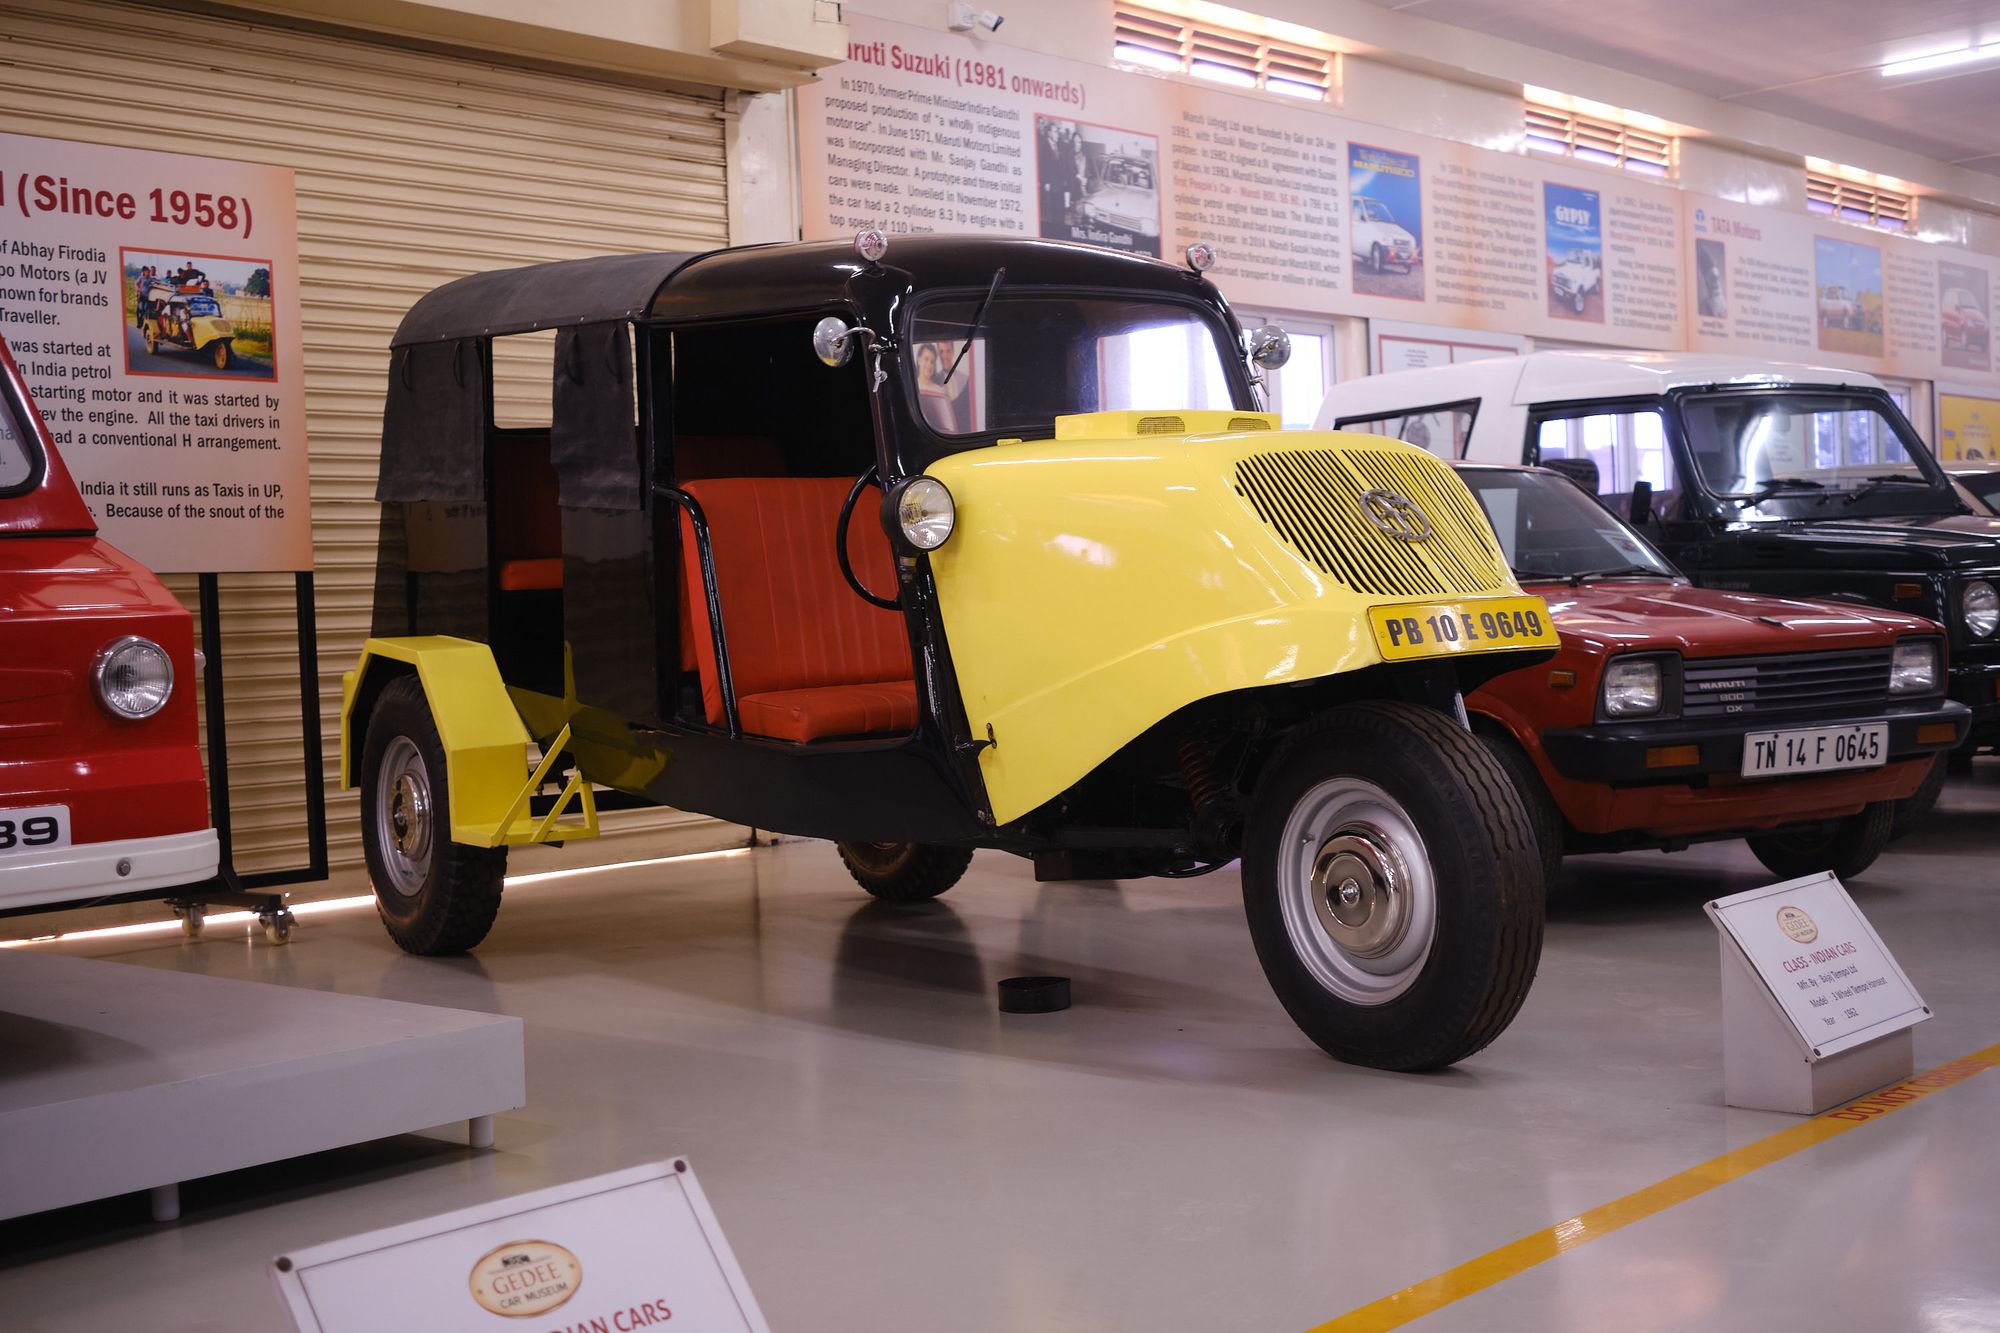 A Trip to the Indian Automotive Past curated by Gedee Car Museum